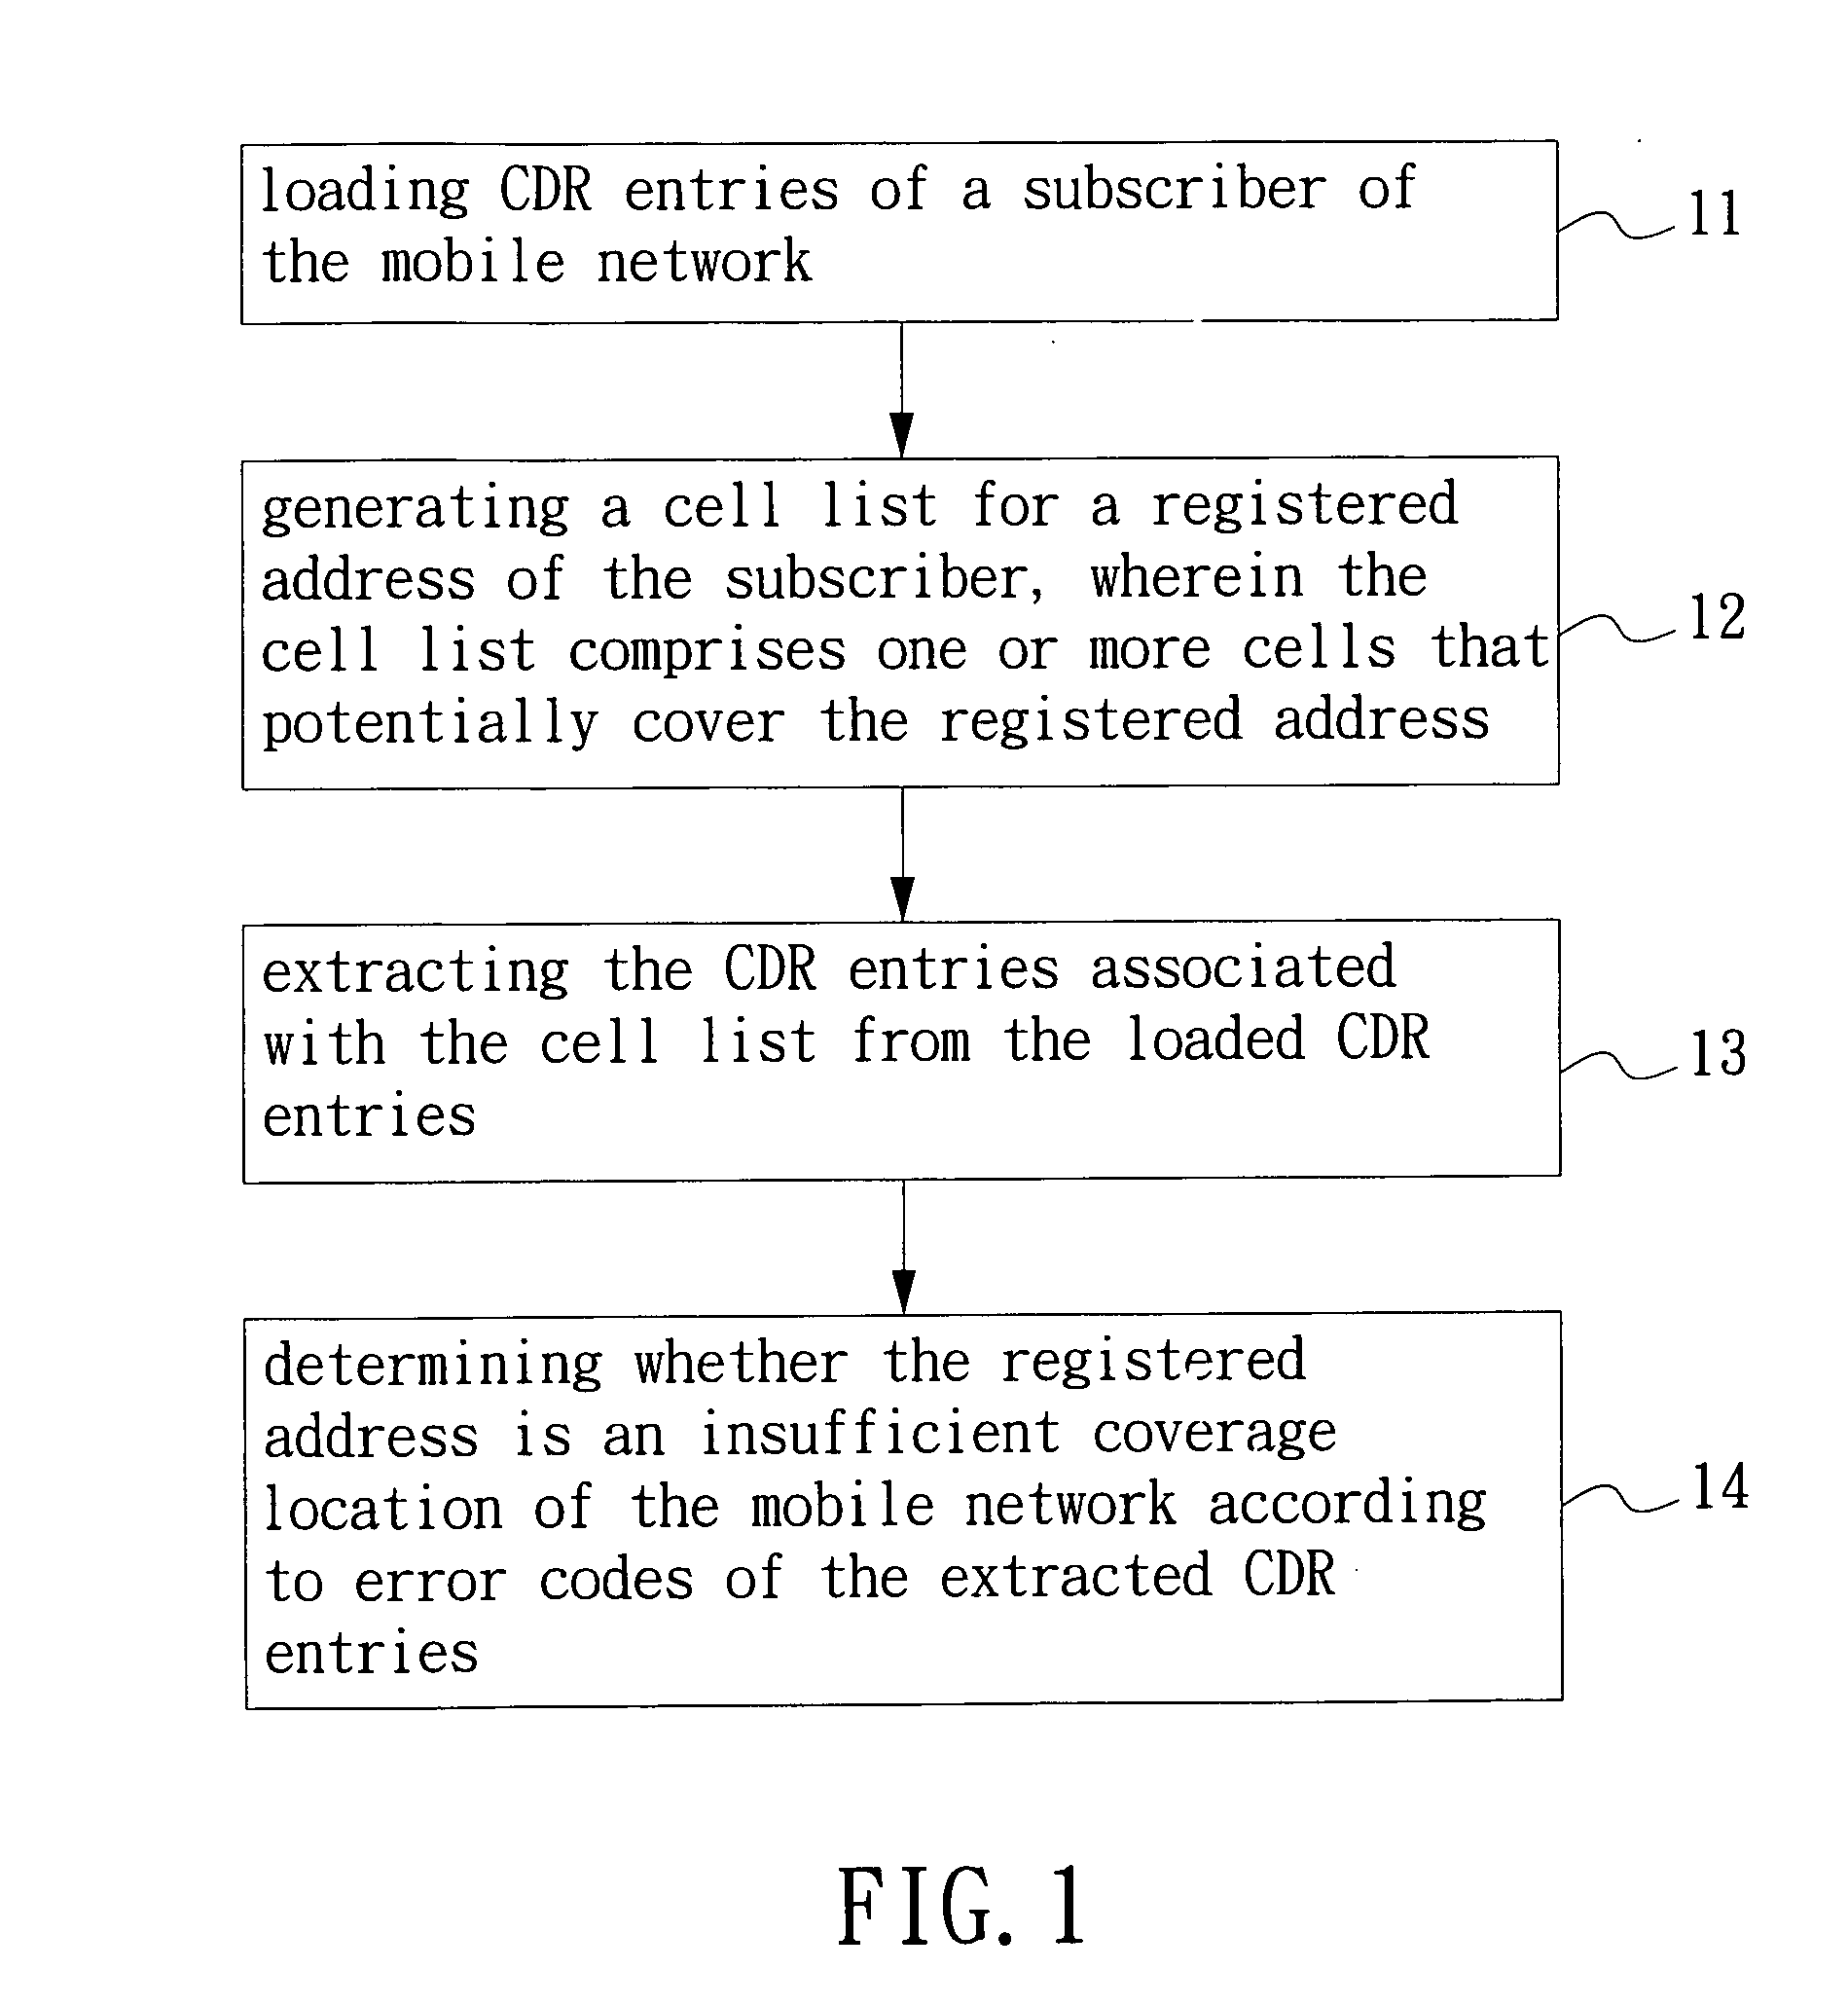 Method and system for detecting insufficient coverage location in mobile network